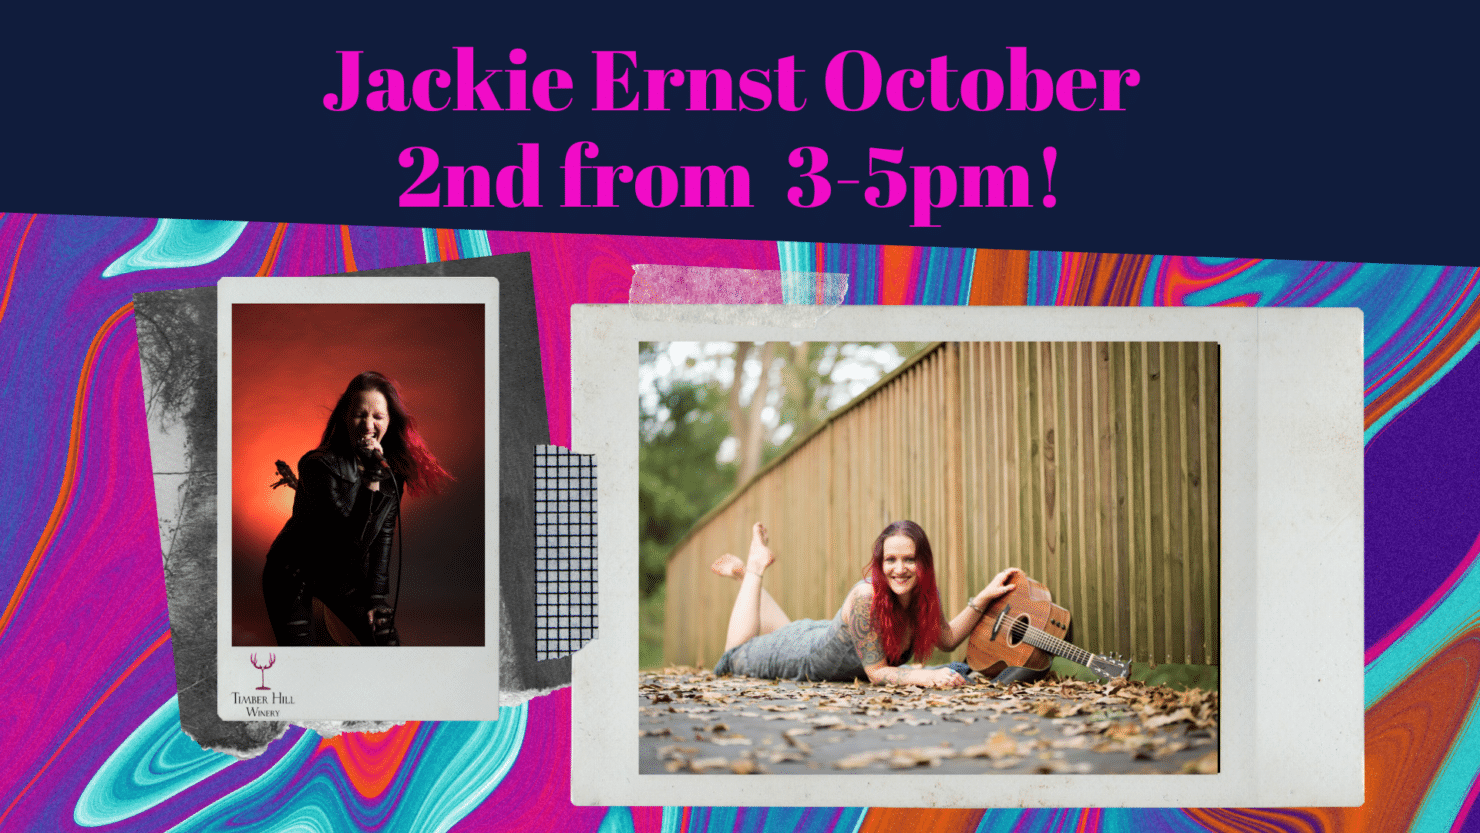 Jackie Ernst at Timber Hill Winery October 2nd from 3-5pm